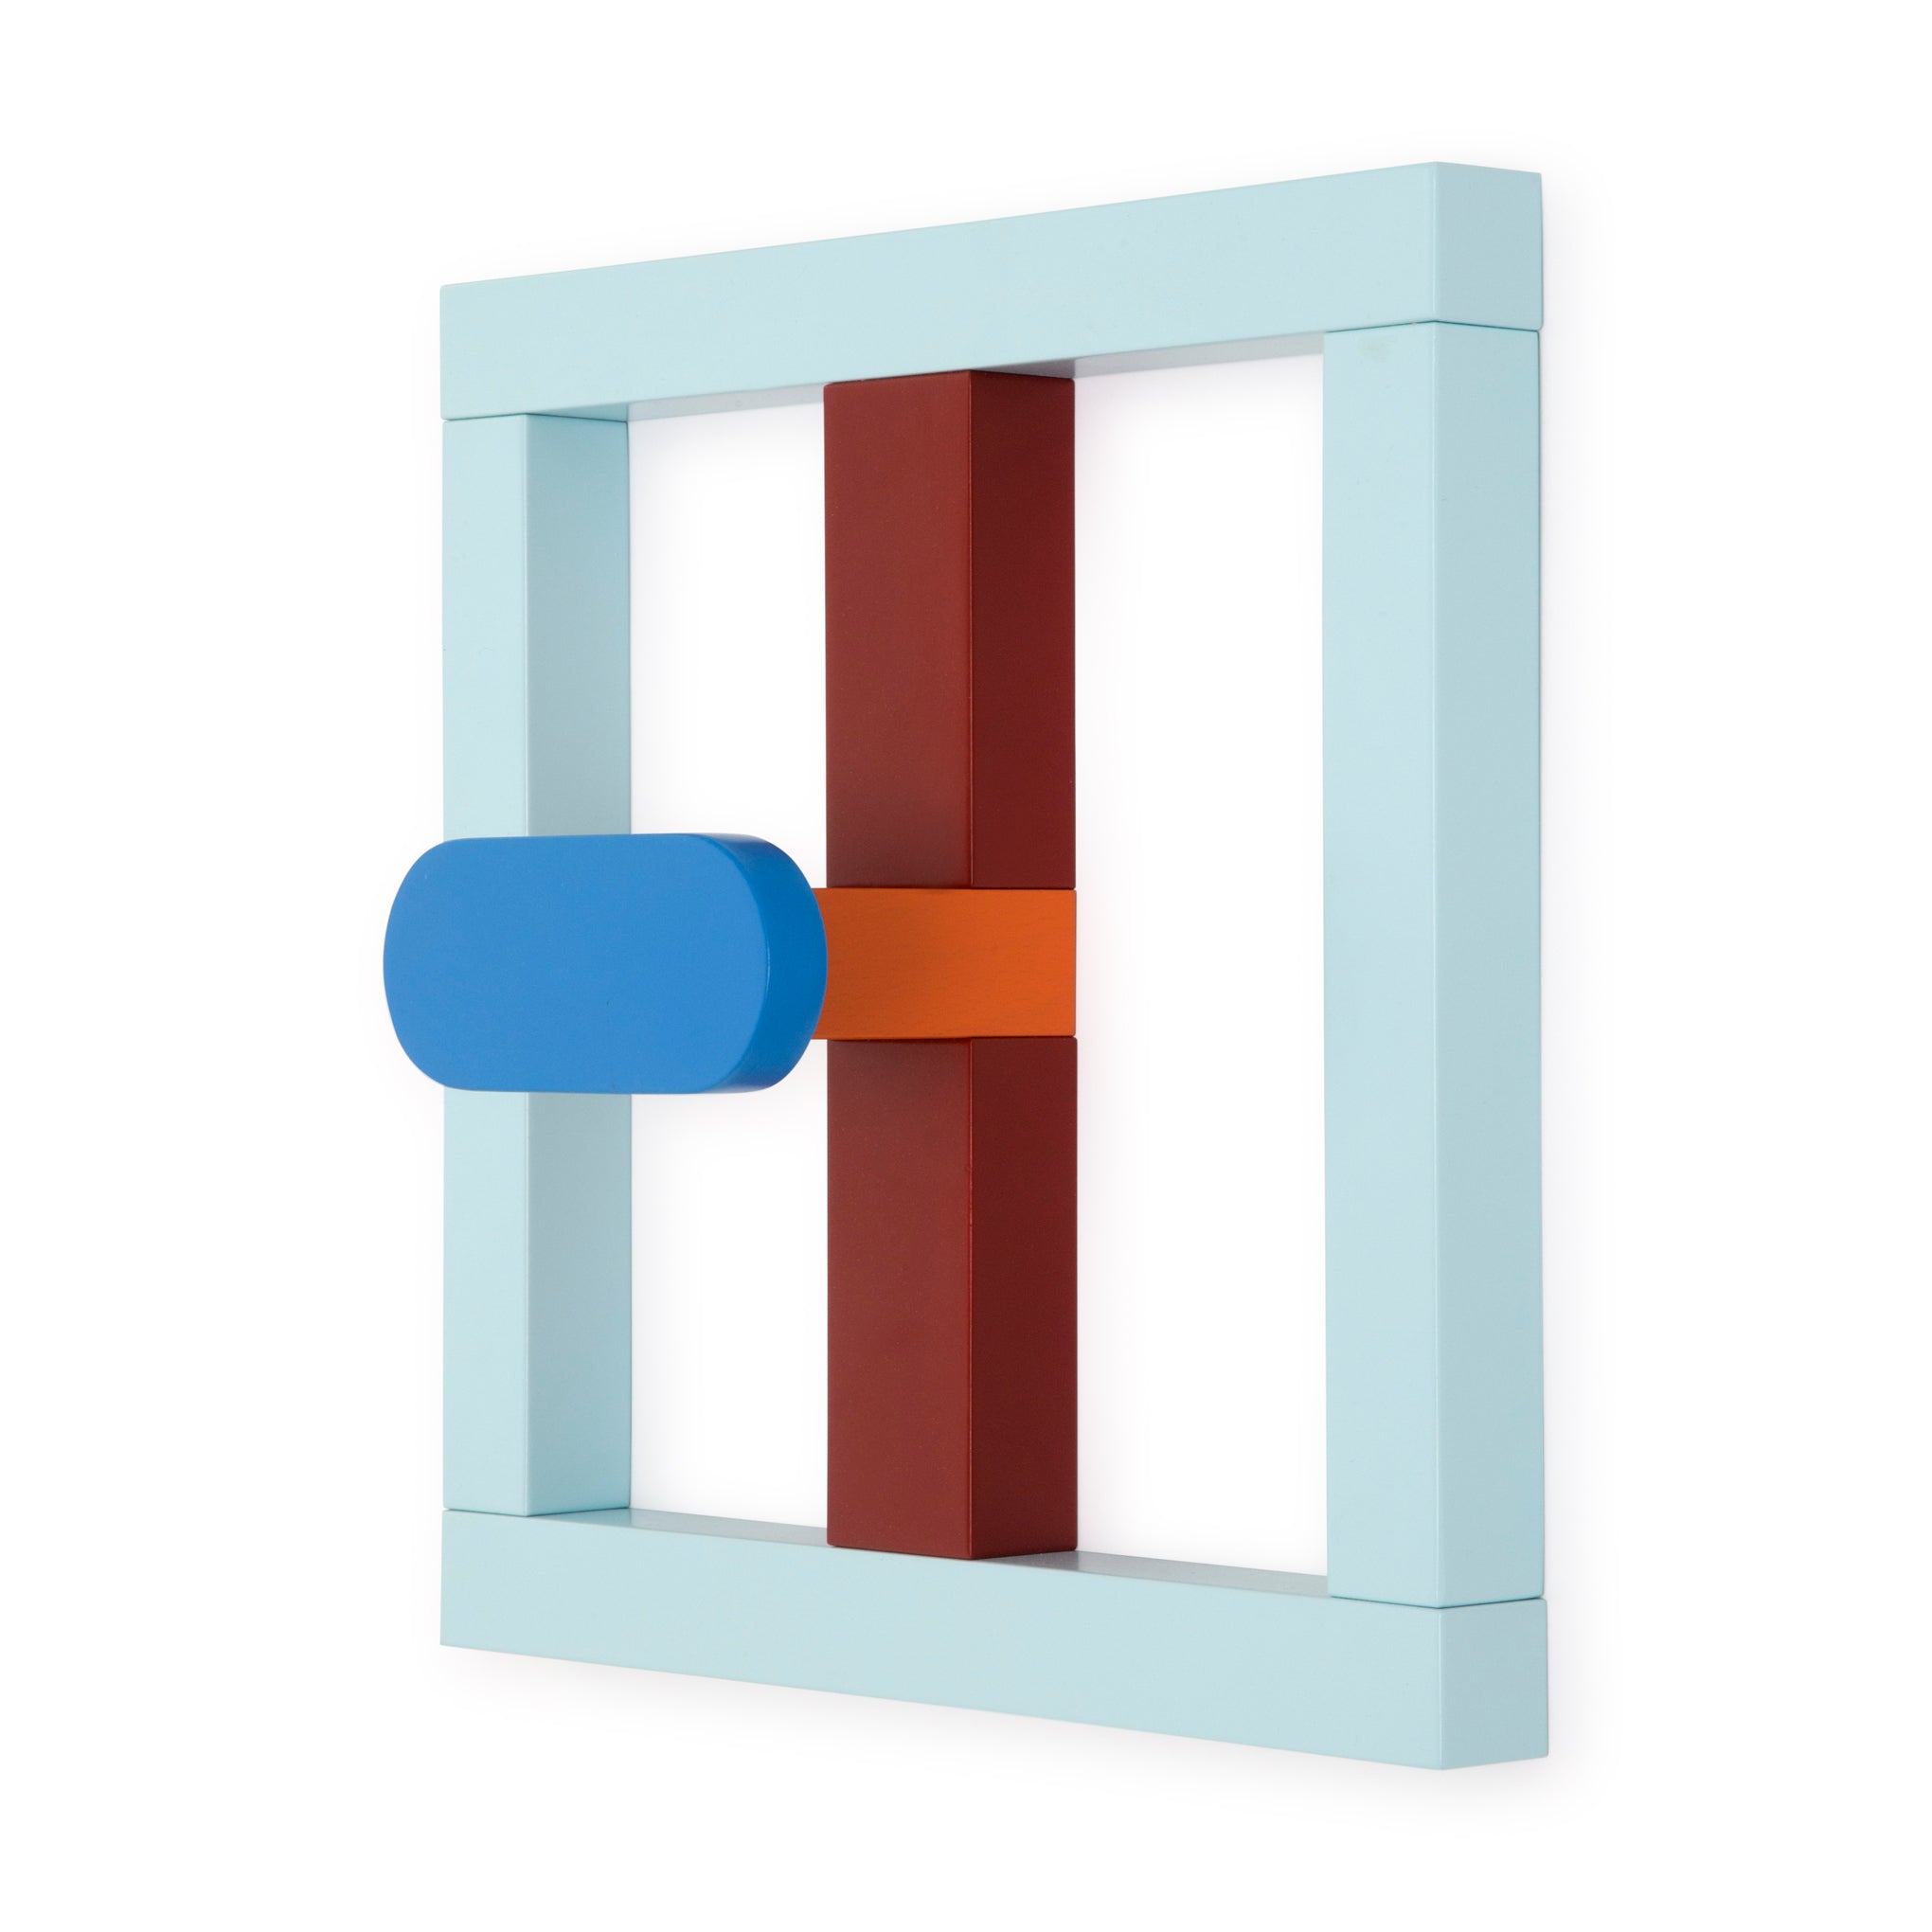 Hooks Small MoMA Du – Store Design by Coat - Raawii Rack Nathalie Pasquier